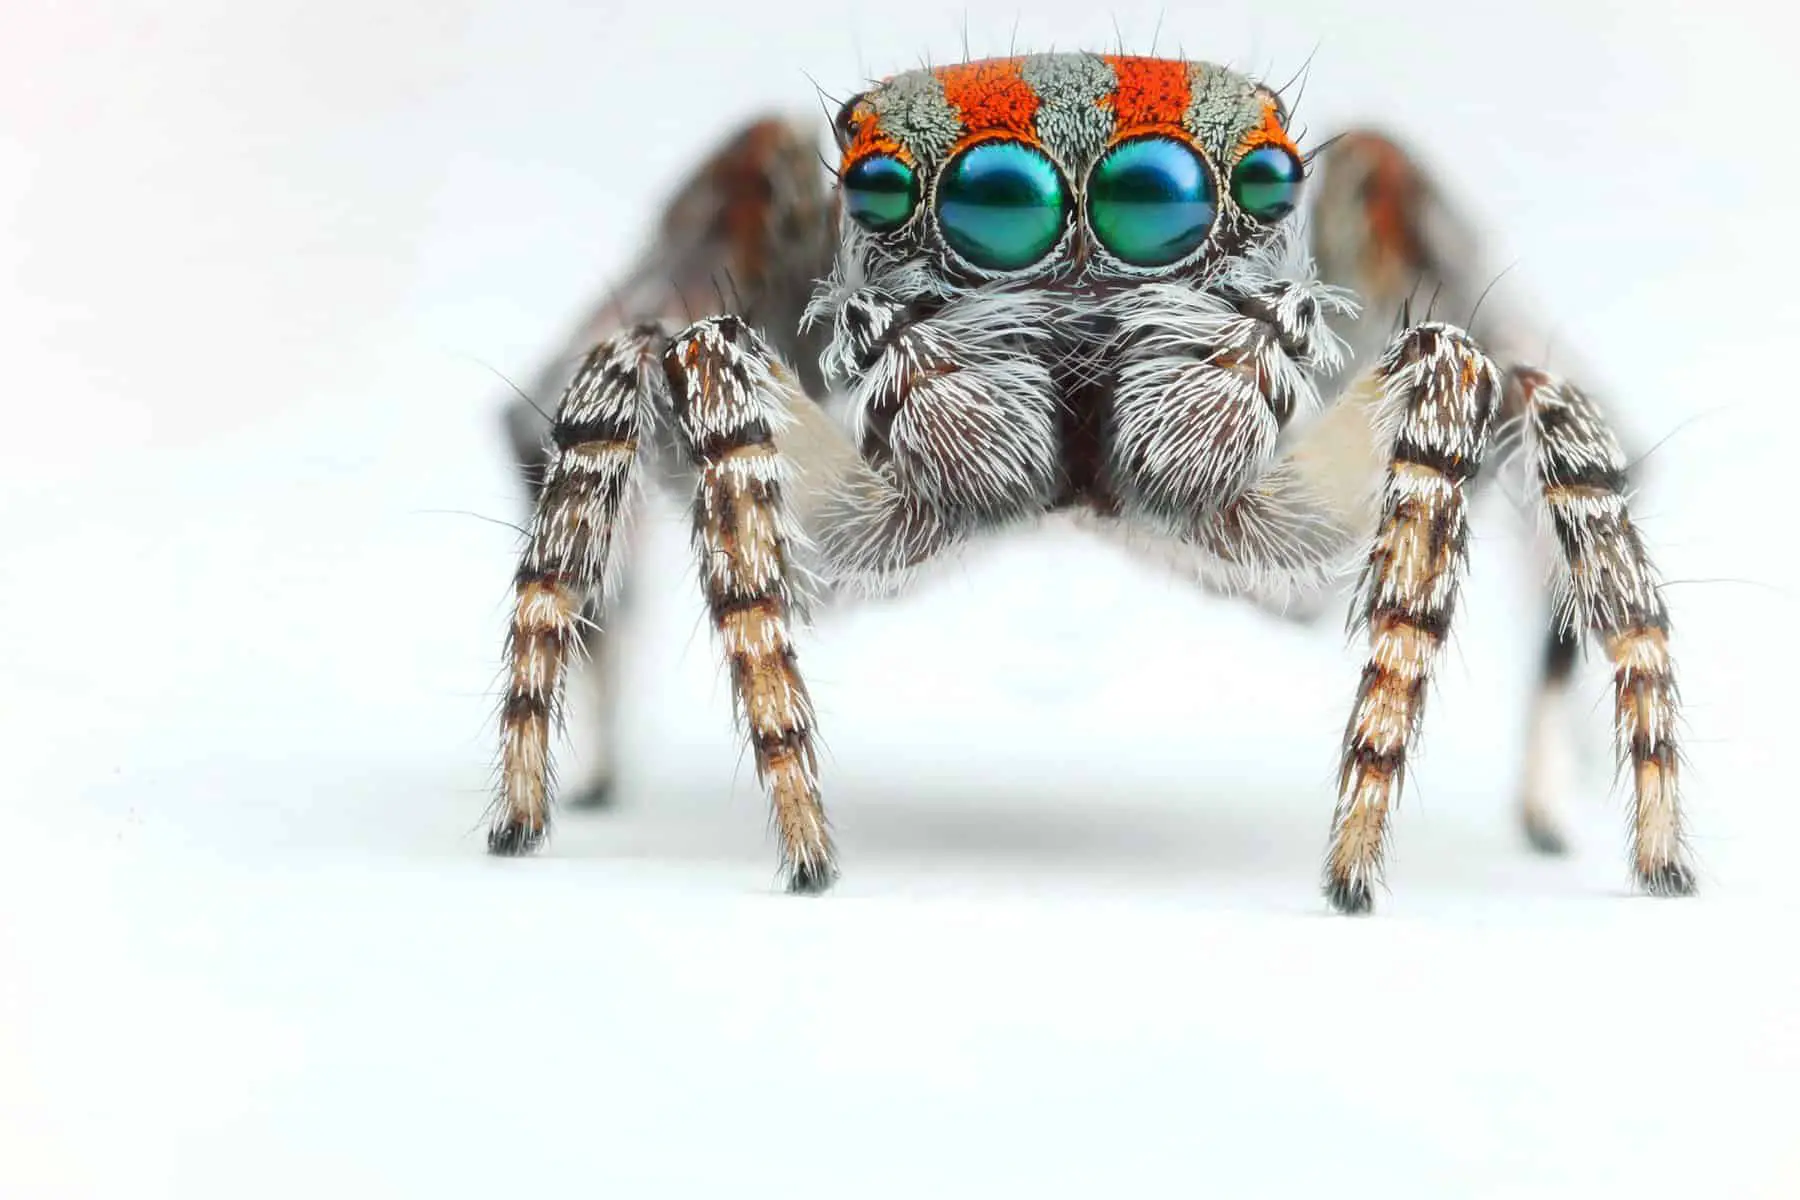 Peacock Jumping spider eyes